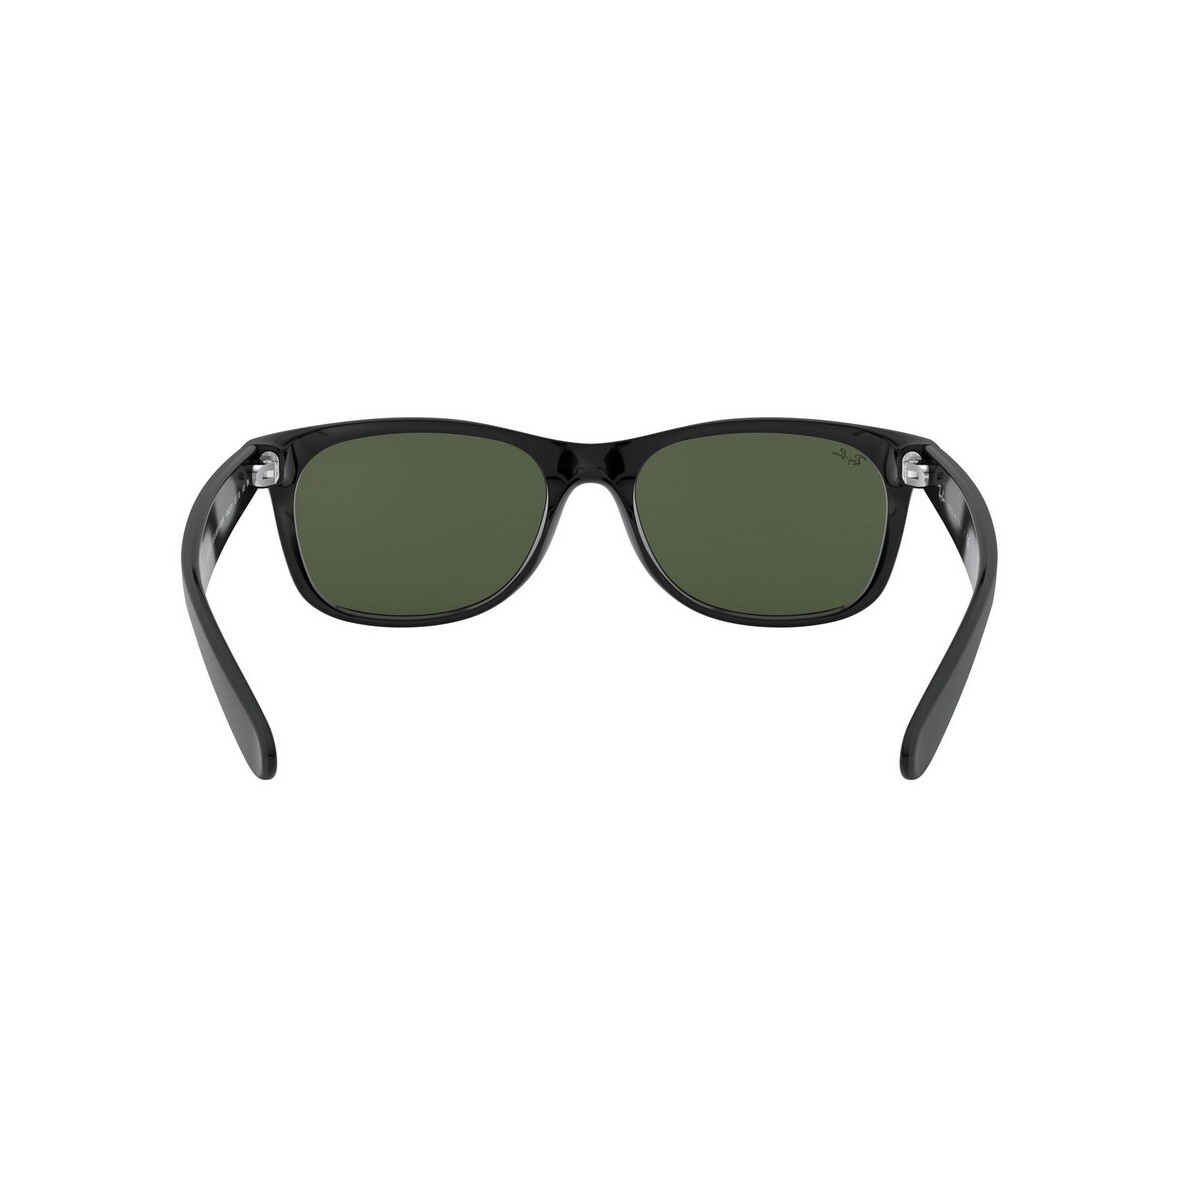 Rayban Unisex Top Rubber Black On Shiny Black Frame With Green Lens Sunglass